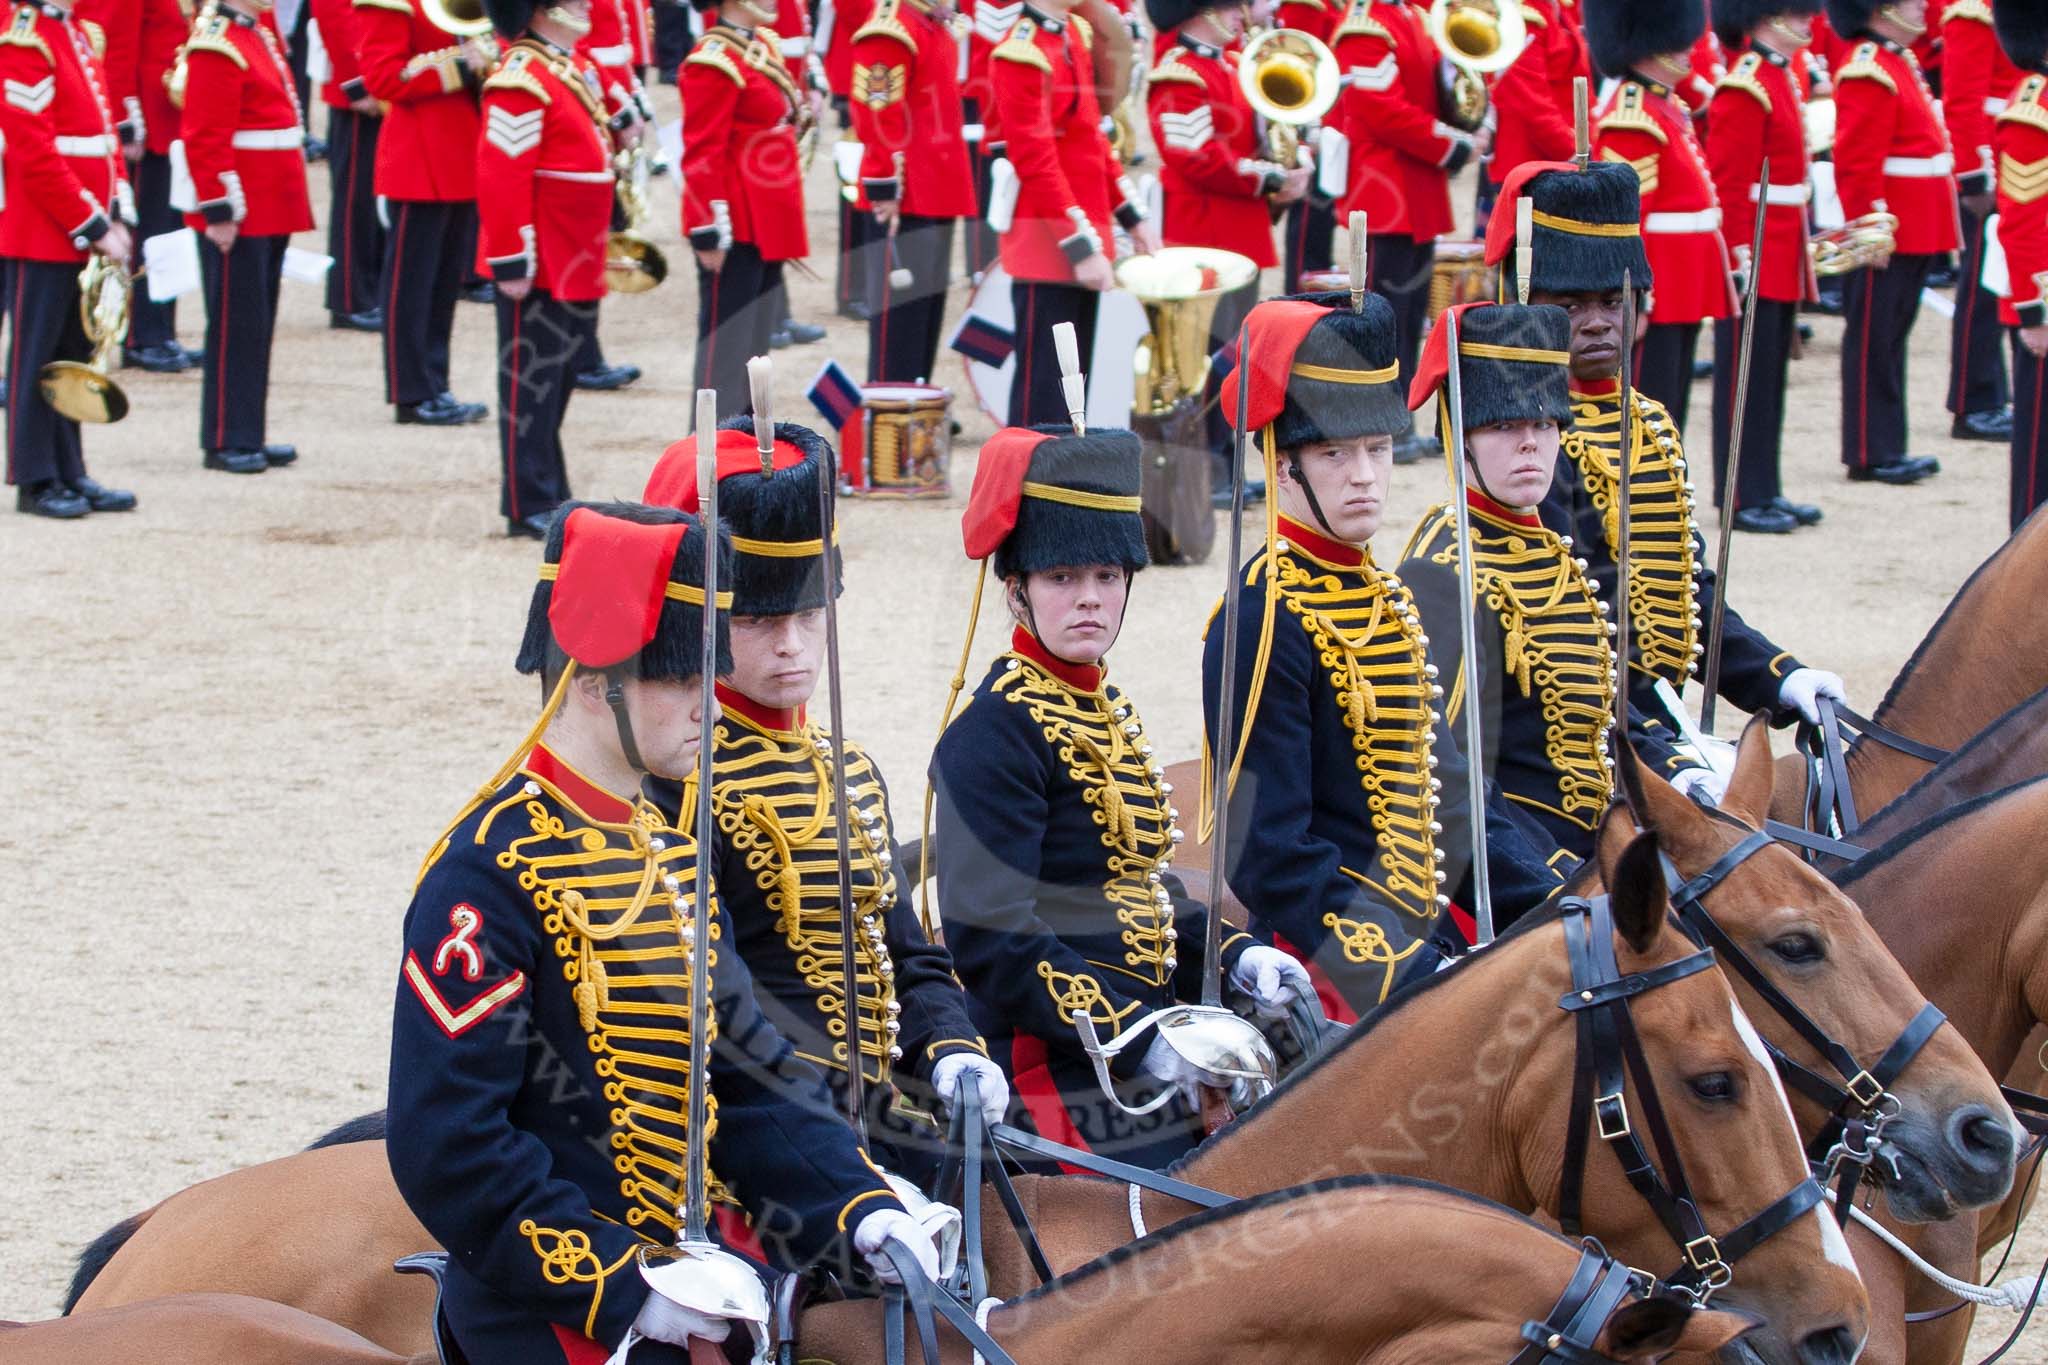 Trooping the Colour 2012: Royal Horse Artillery during the Ride Past..
Horse Guards Parade, Westminster,
London SW1,

United Kingdom,
on 16 June 2012 at 11:55, image #547